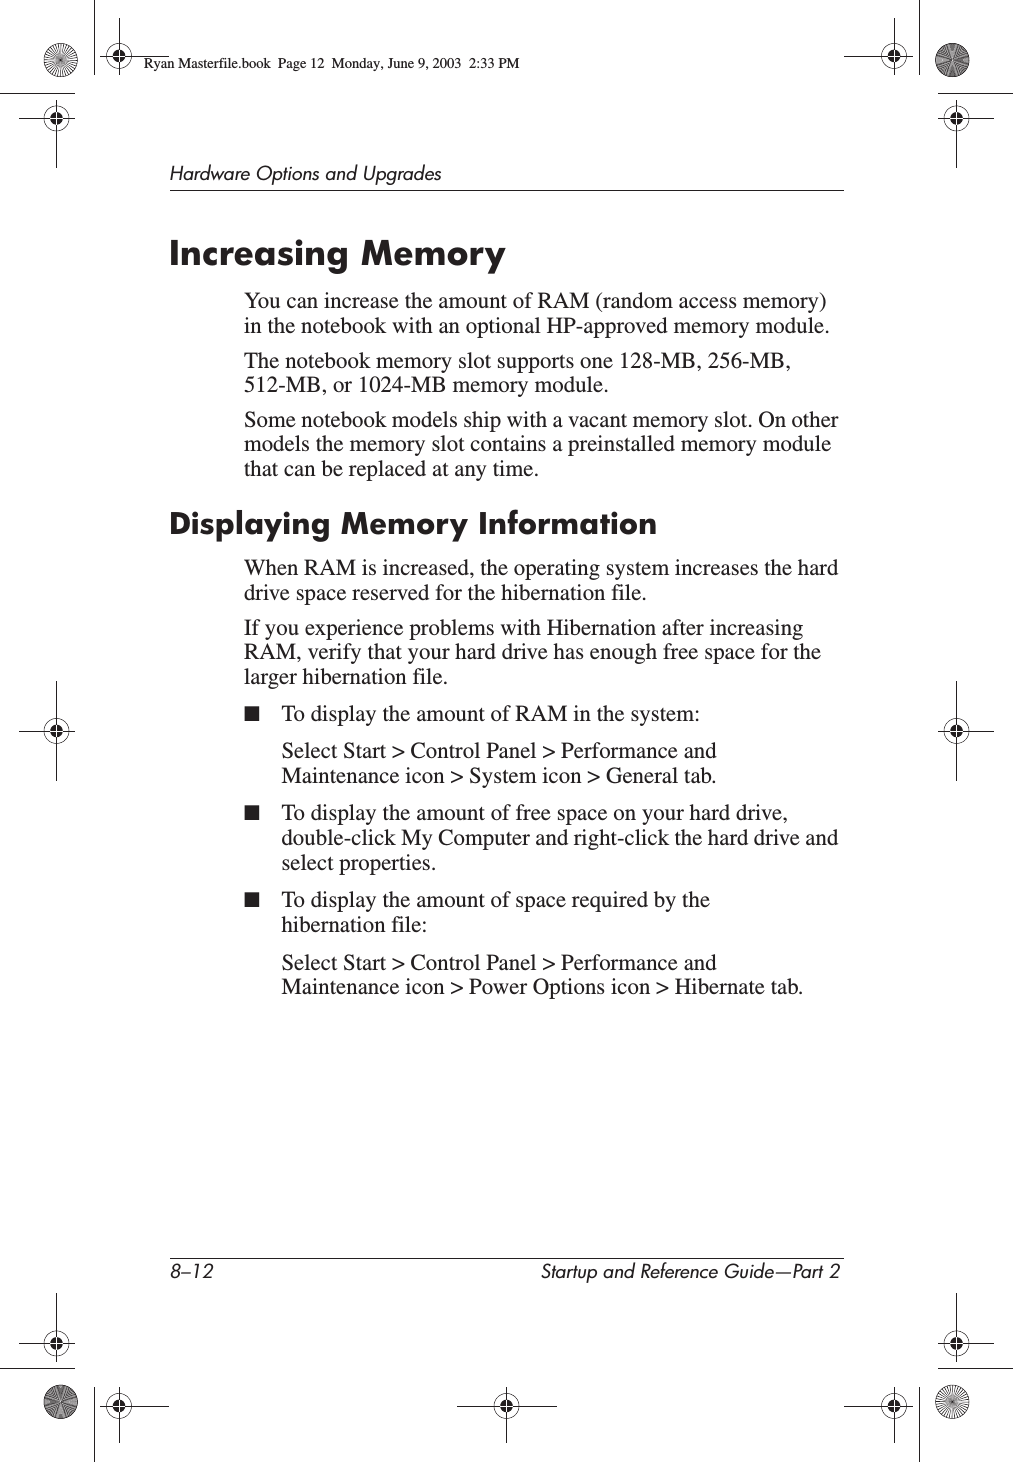 8–12 Startup and Reference Guide—Part 2Hardware Options and UpgradesIncreasing MemoryYou can increase the amount of RAM (random access memory) in the notebook with an optional HP-approved memory module.The notebook memory slot supports one 128-MB, 256-MB, 512-MB, or 1024-MB memory module.Some notebook models ship with a vacant memory slot. On other models the memory slot contains a preinstalled memory module that can be replaced at any time.Displaying Memory InformationWhen RAM is increased, the operating system increases the hard drive space reserved for the hibernation file.If you experience problems with Hibernation after increasing RAM, verify that your hard drive has enough free space for the larger hibernation file.■To display the amount of RAM in the system:Select Start &gt; Control Panel &gt; Performance and Maintenance icon &gt; System icon &gt; General tab.■To display the amount of free space on your hard drive, double-click My Computer and right-click the hard drive and select properties.■To display the amount of space required by the hibernation file:Select Start &gt; Control Panel &gt; Performance and Maintenance icon &gt; Power Options icon &gt; Hibernate tab.Ryan Masterfile.book  Page 12  Monday, June 9, 2003  2:33 PM